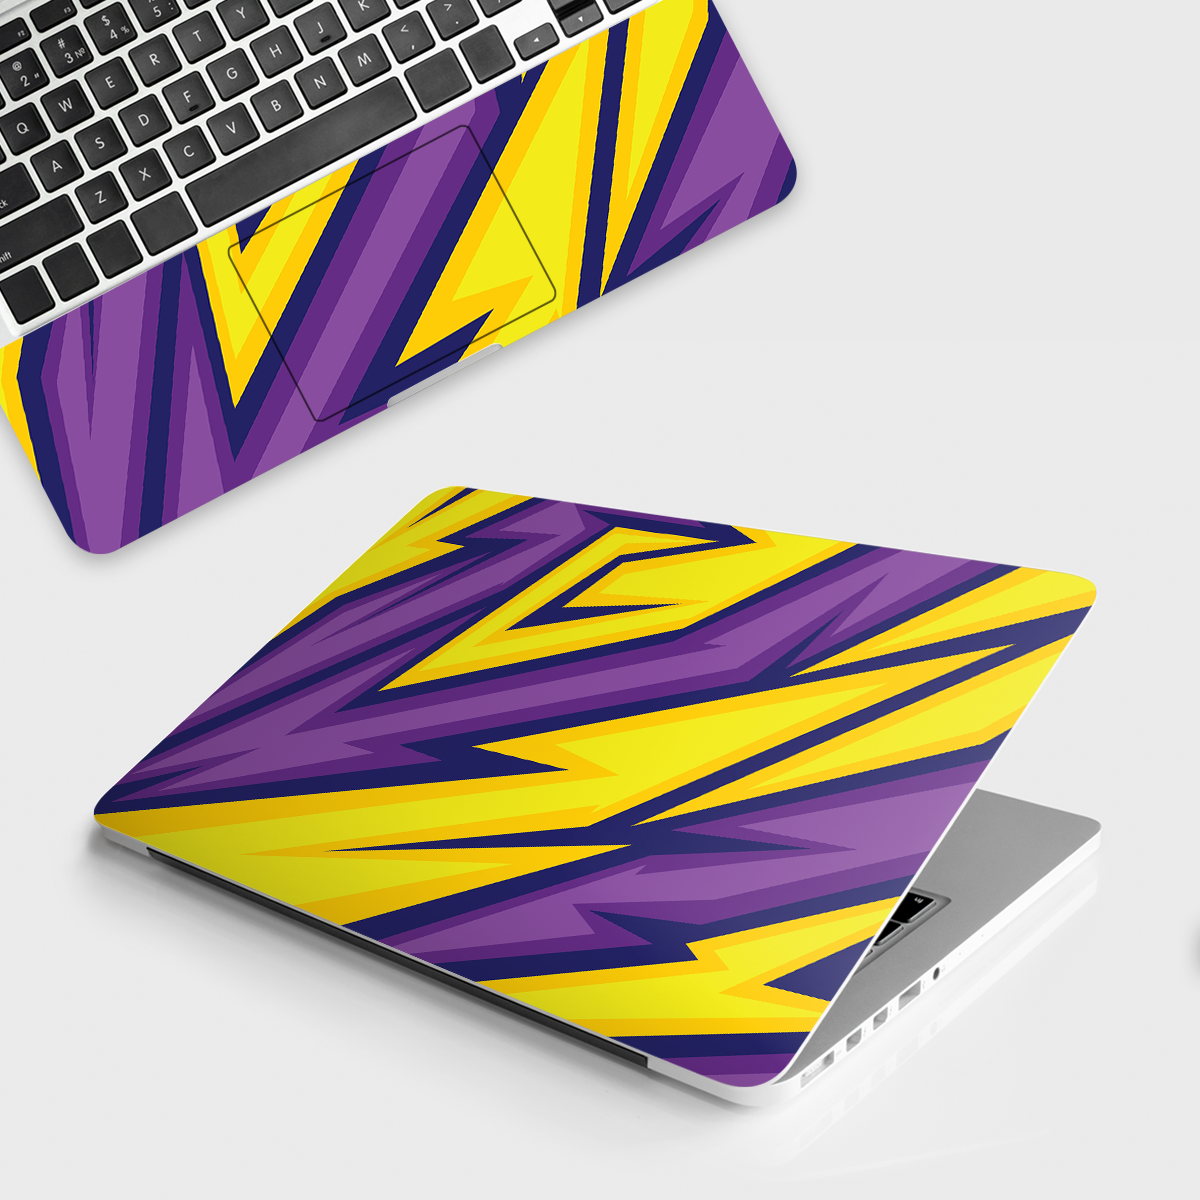 Fomo Store Laptop Skins Abstract Yellow & Purple Racing Stripes